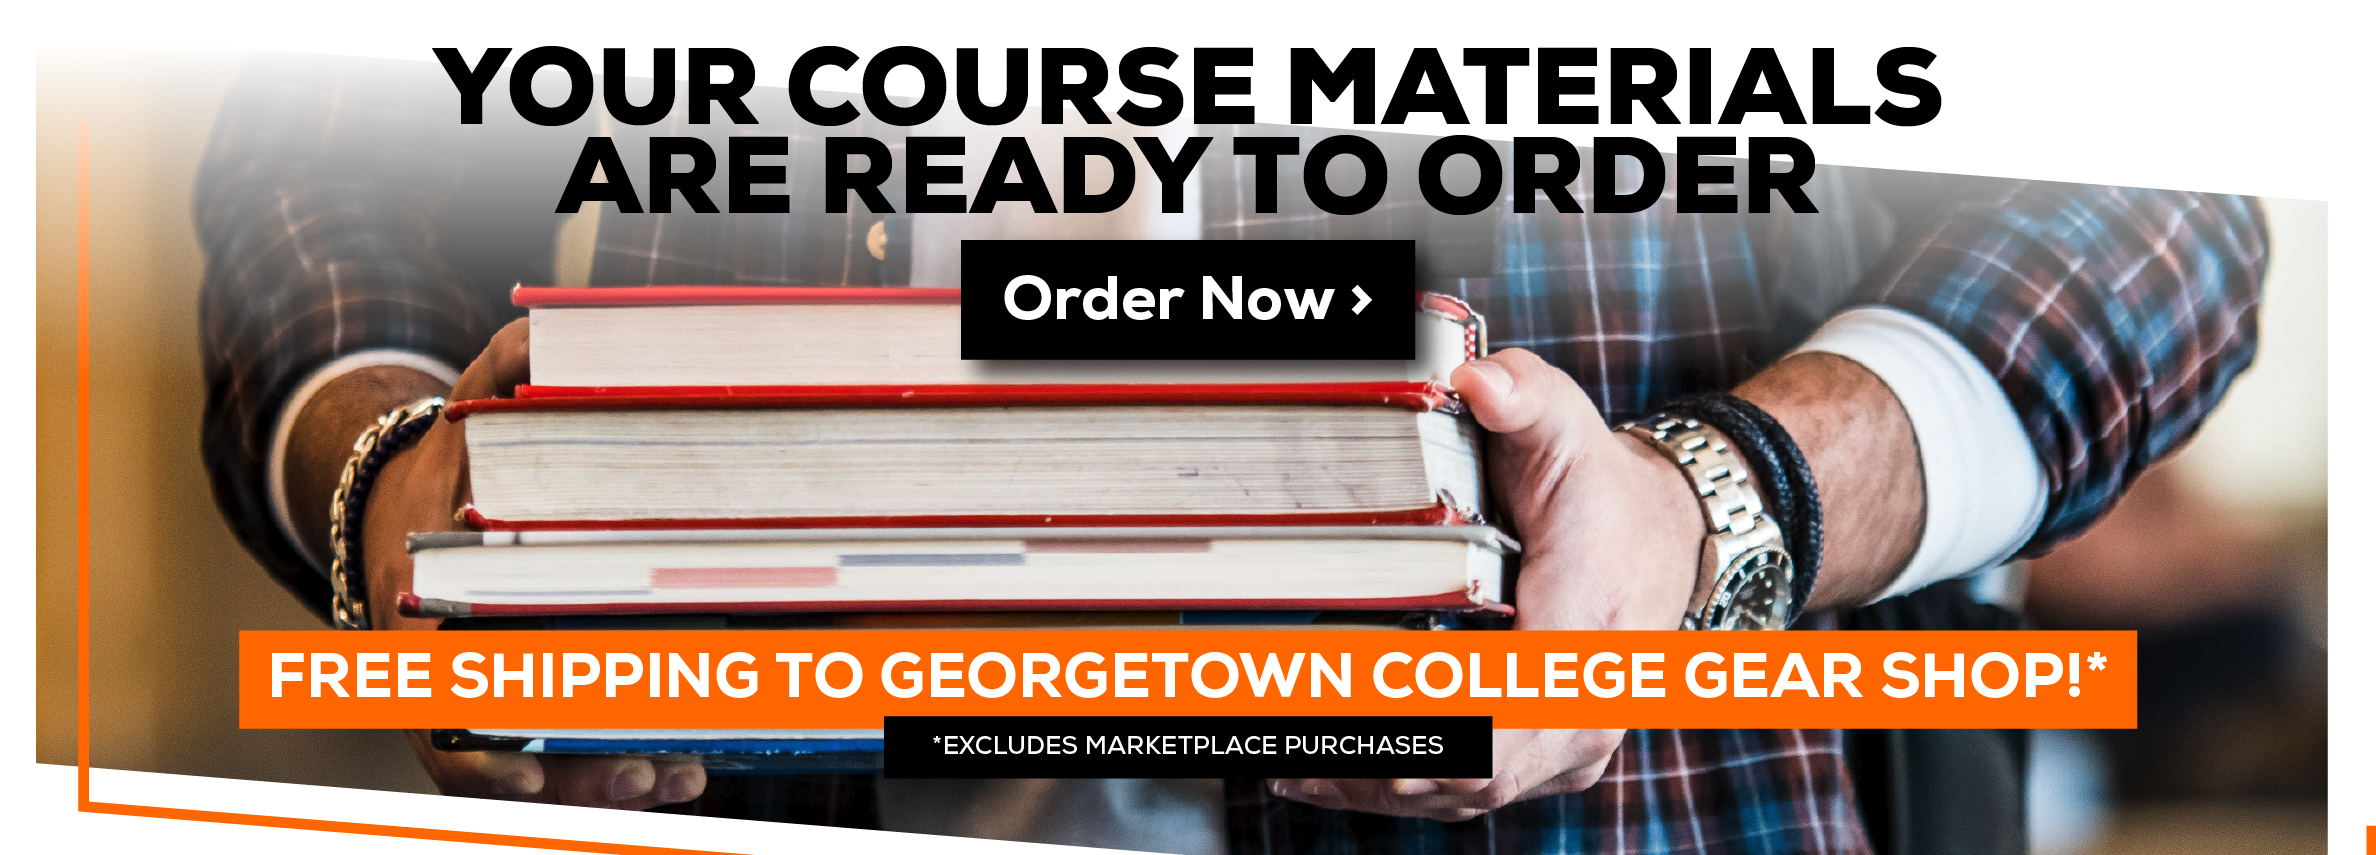 Your Course Materials are Ready to Order. Order Now. Free shipping to Georgetown College Gear Shop!* *Excludes Marketplace Purchases.